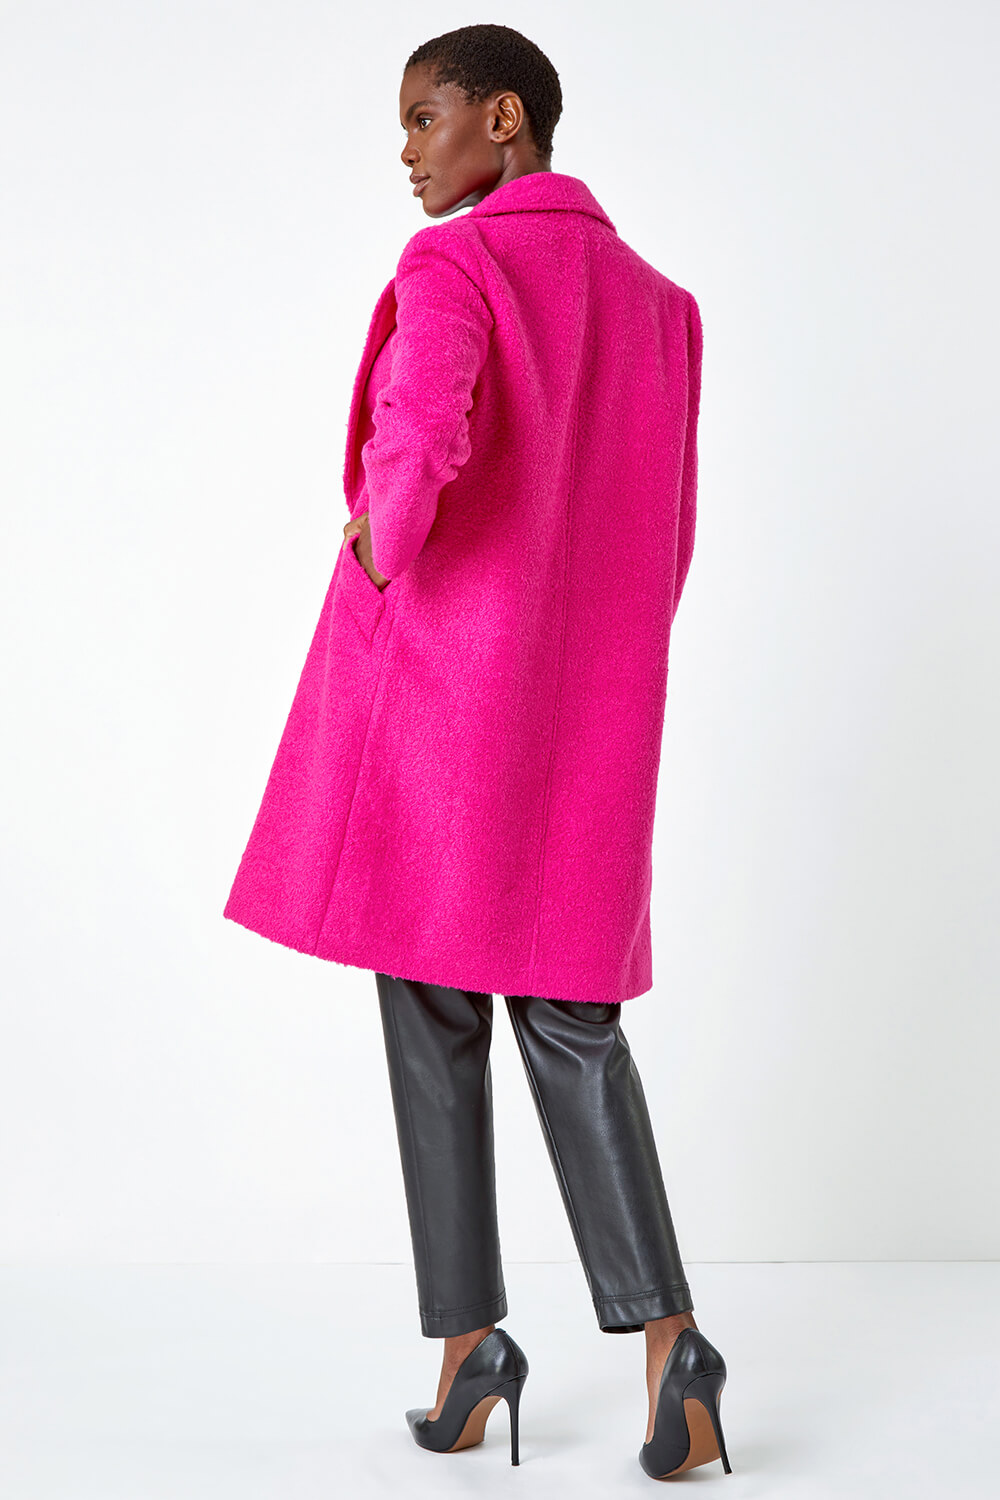 CERISE Relaxed Double Breasted Boucle Coat, Image 3 of 5